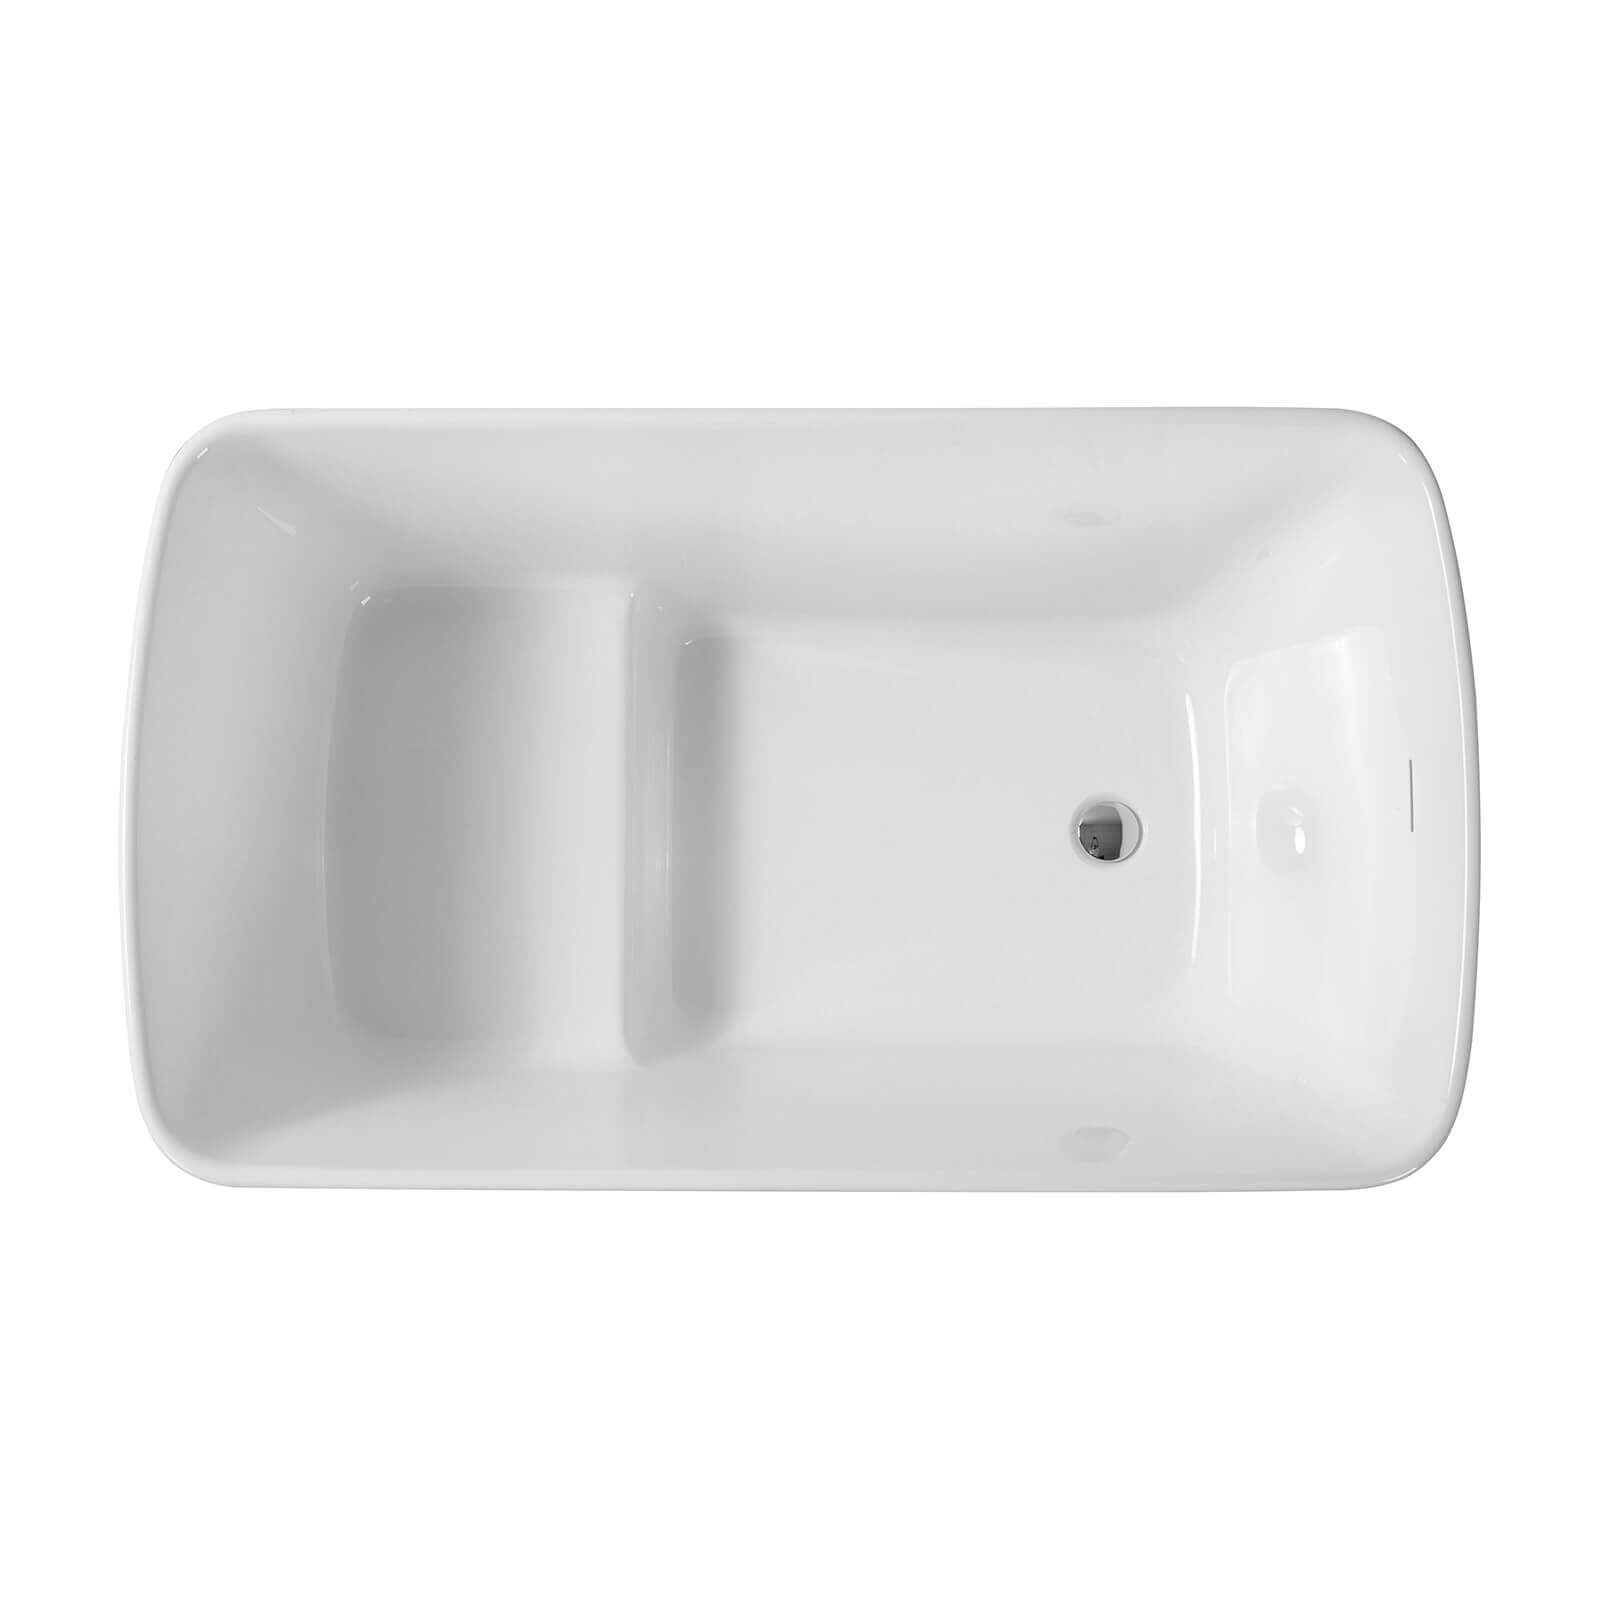 Top view of 49 inch acrylic bathtub with integrated seat